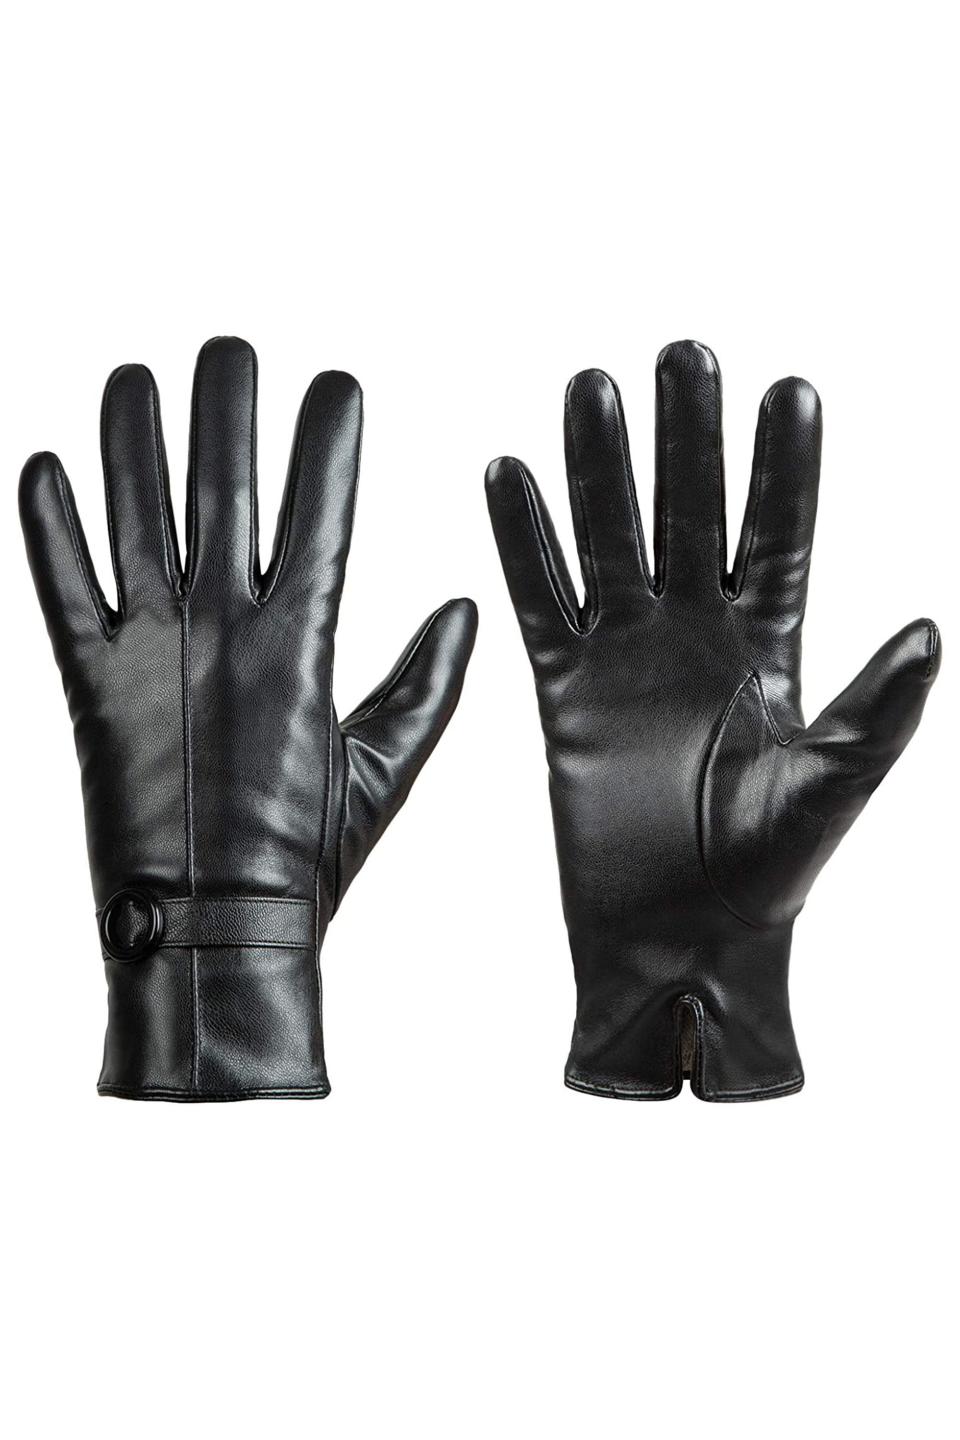 31) Leather Touchscreen Texting and Driving Gloves